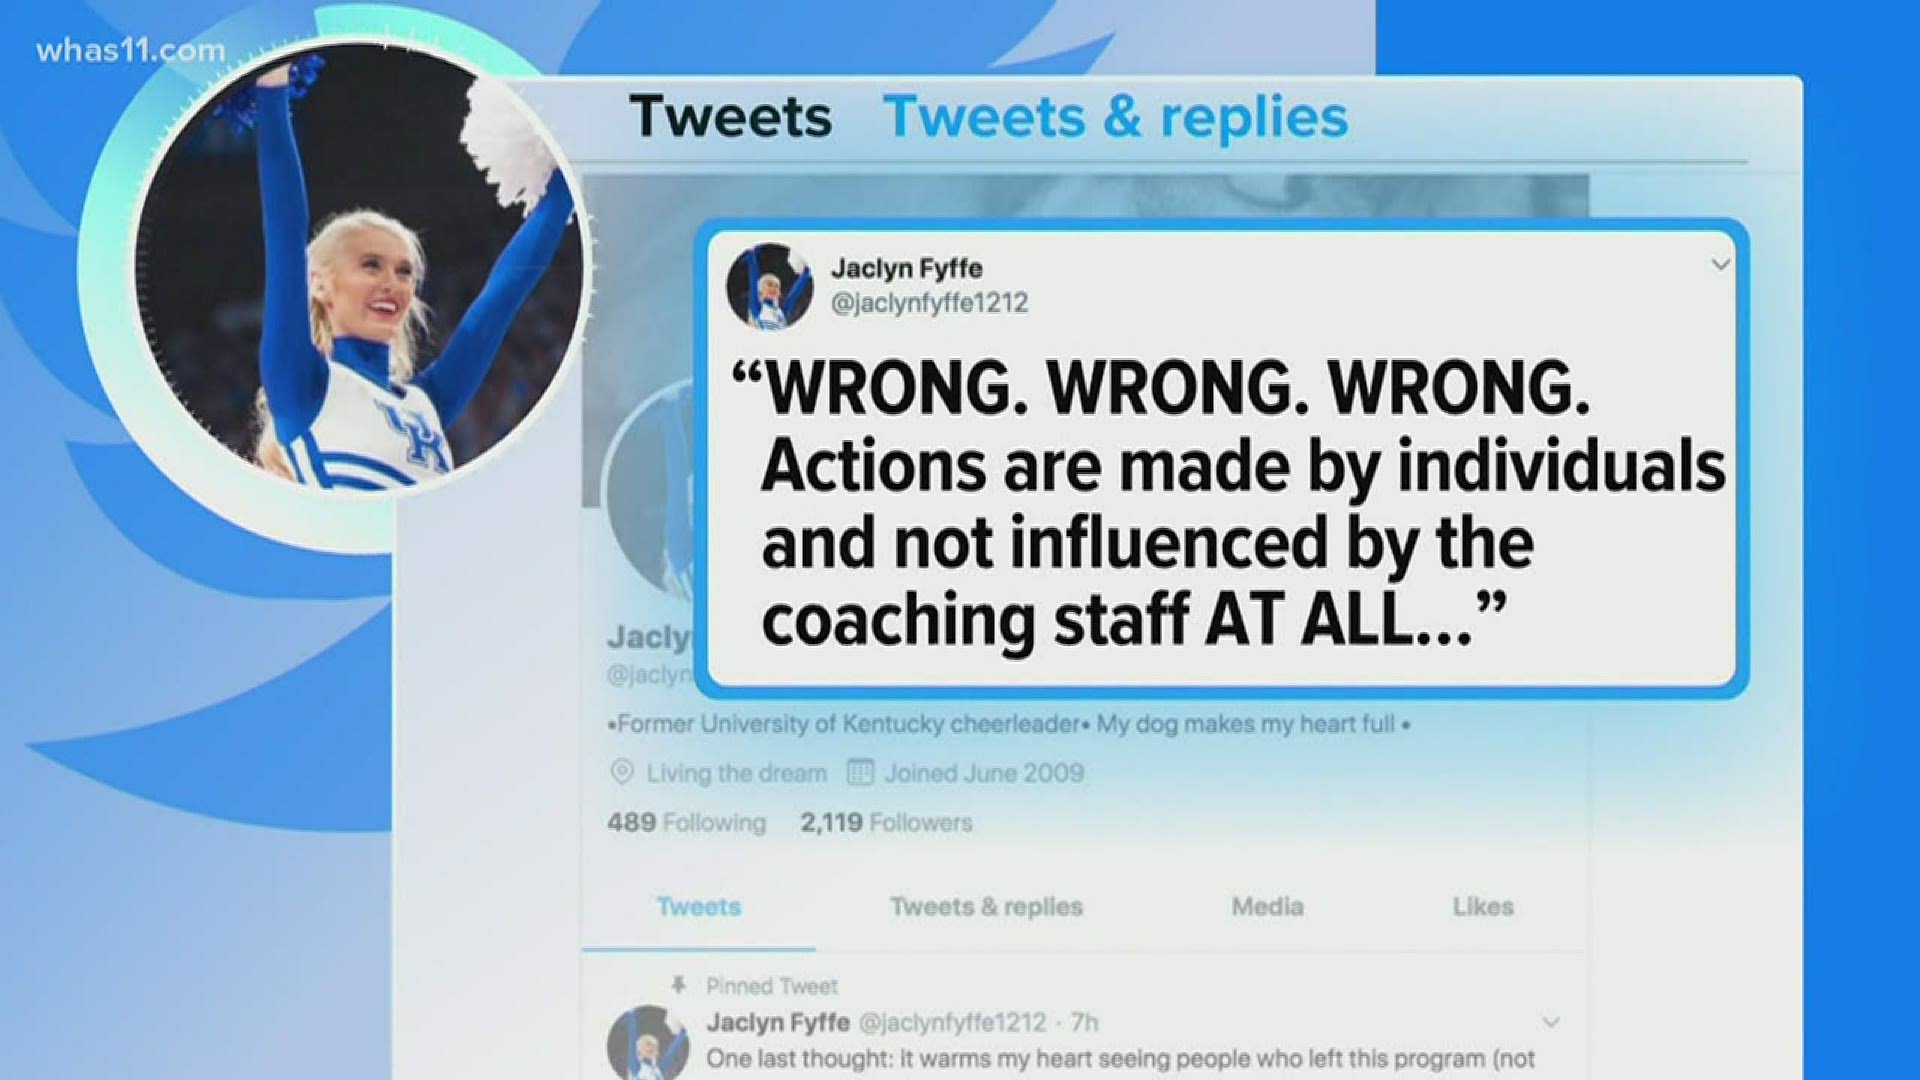 Reaction from the university of kentucky hazing investigation and firings is all over social media.. and several people have some different takes on the scandal